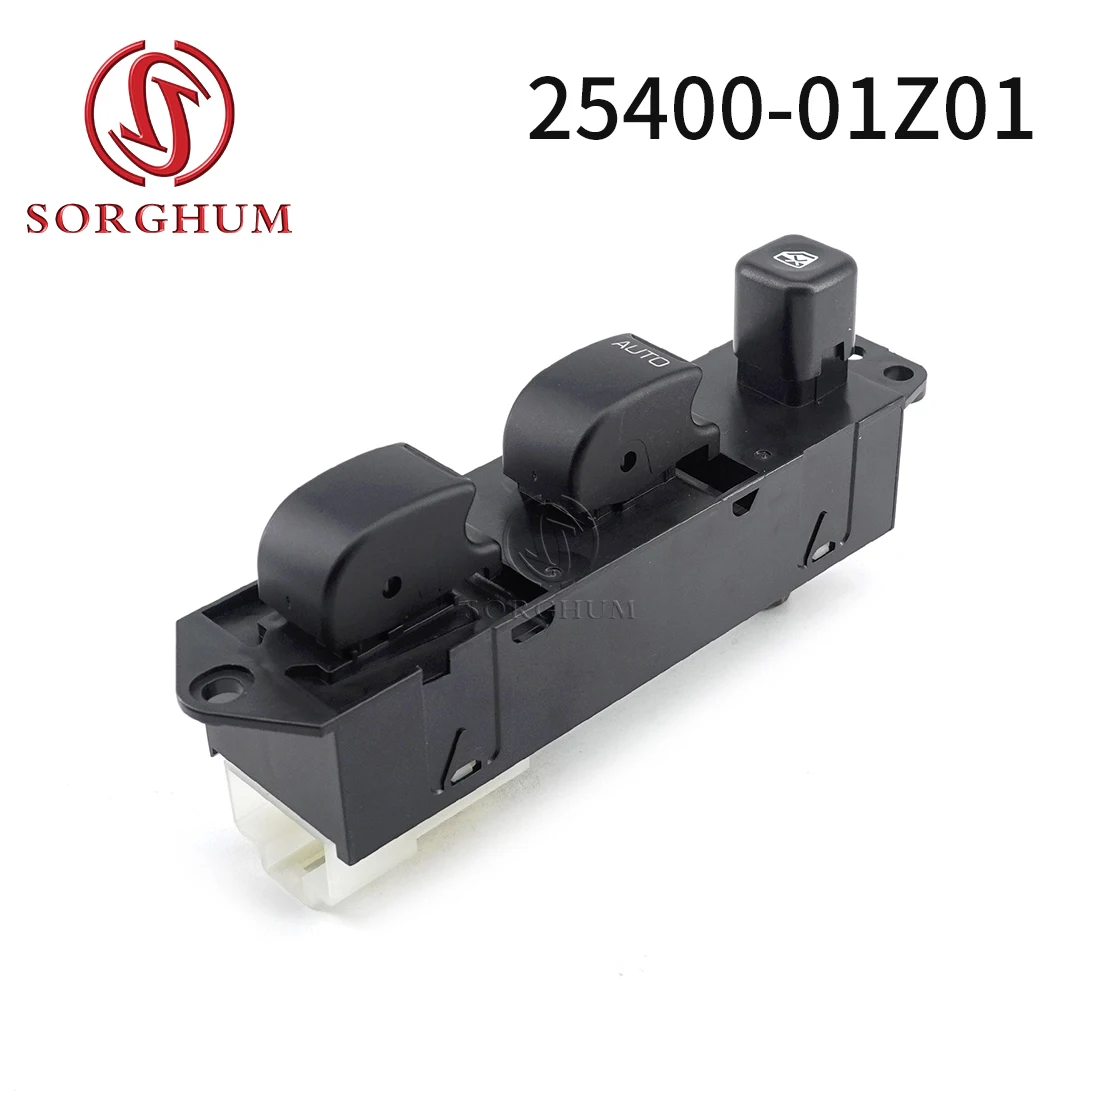 

SORGHUM 25400-01Z01 For Nissan GW26 UD390 GE13 Truck Parts Power Window Lifter Control Switch Button 2540001Z01 Car Accessories